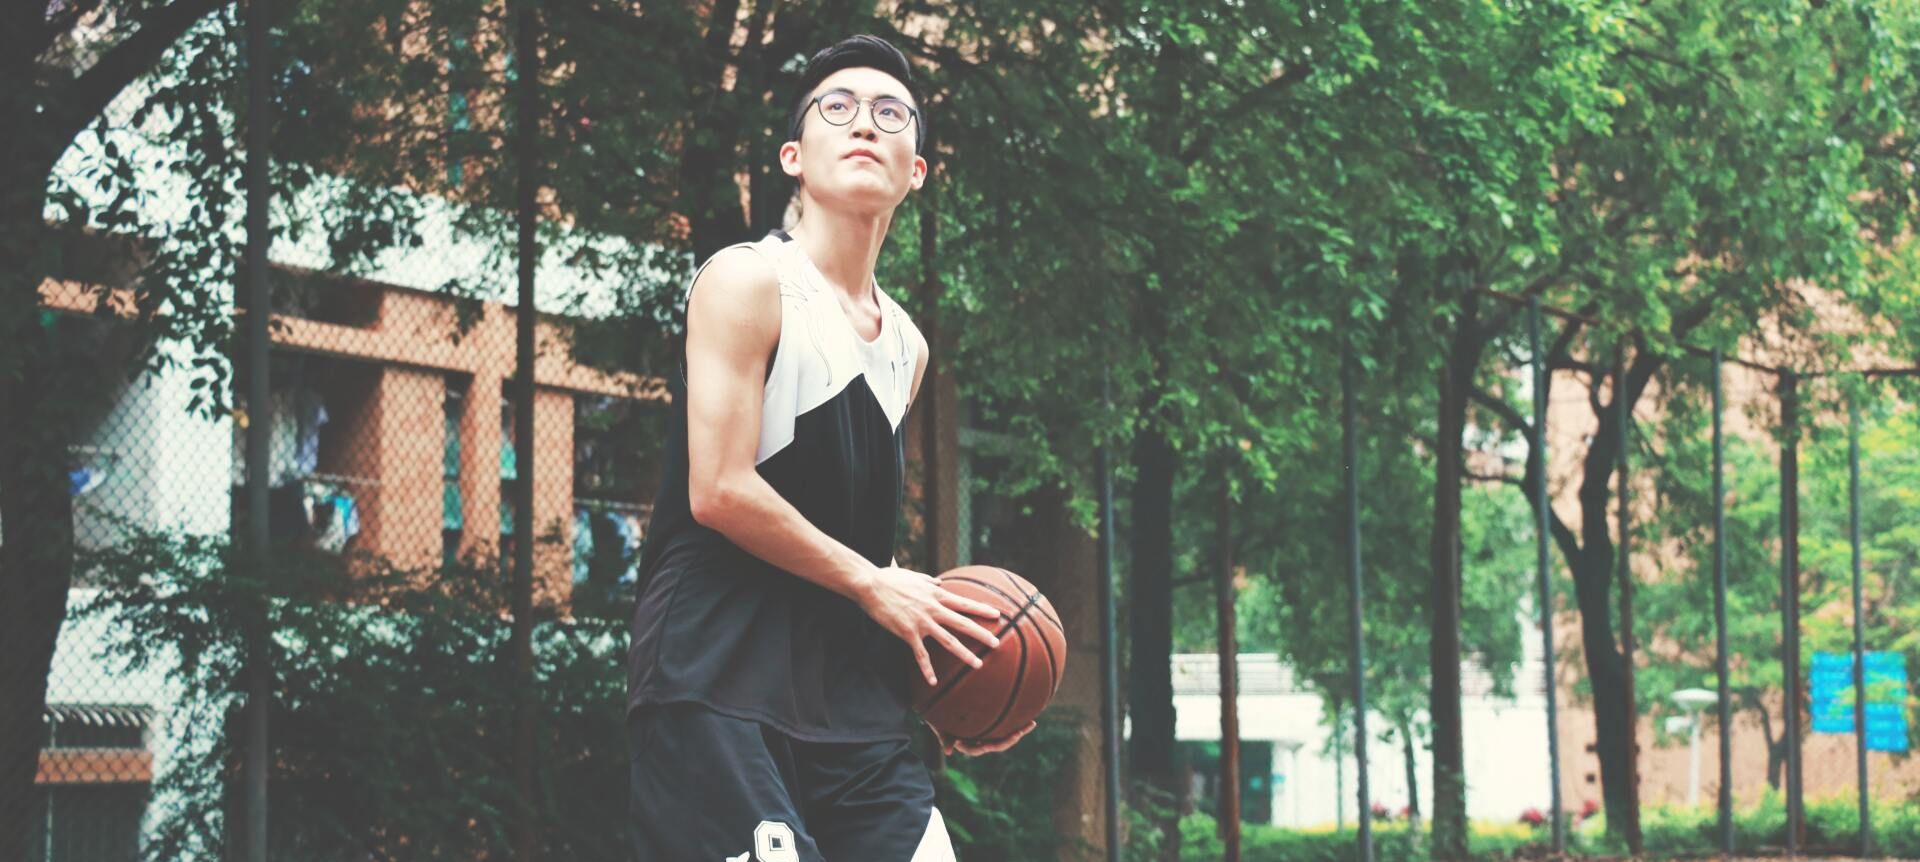 man with glasses playing basketball